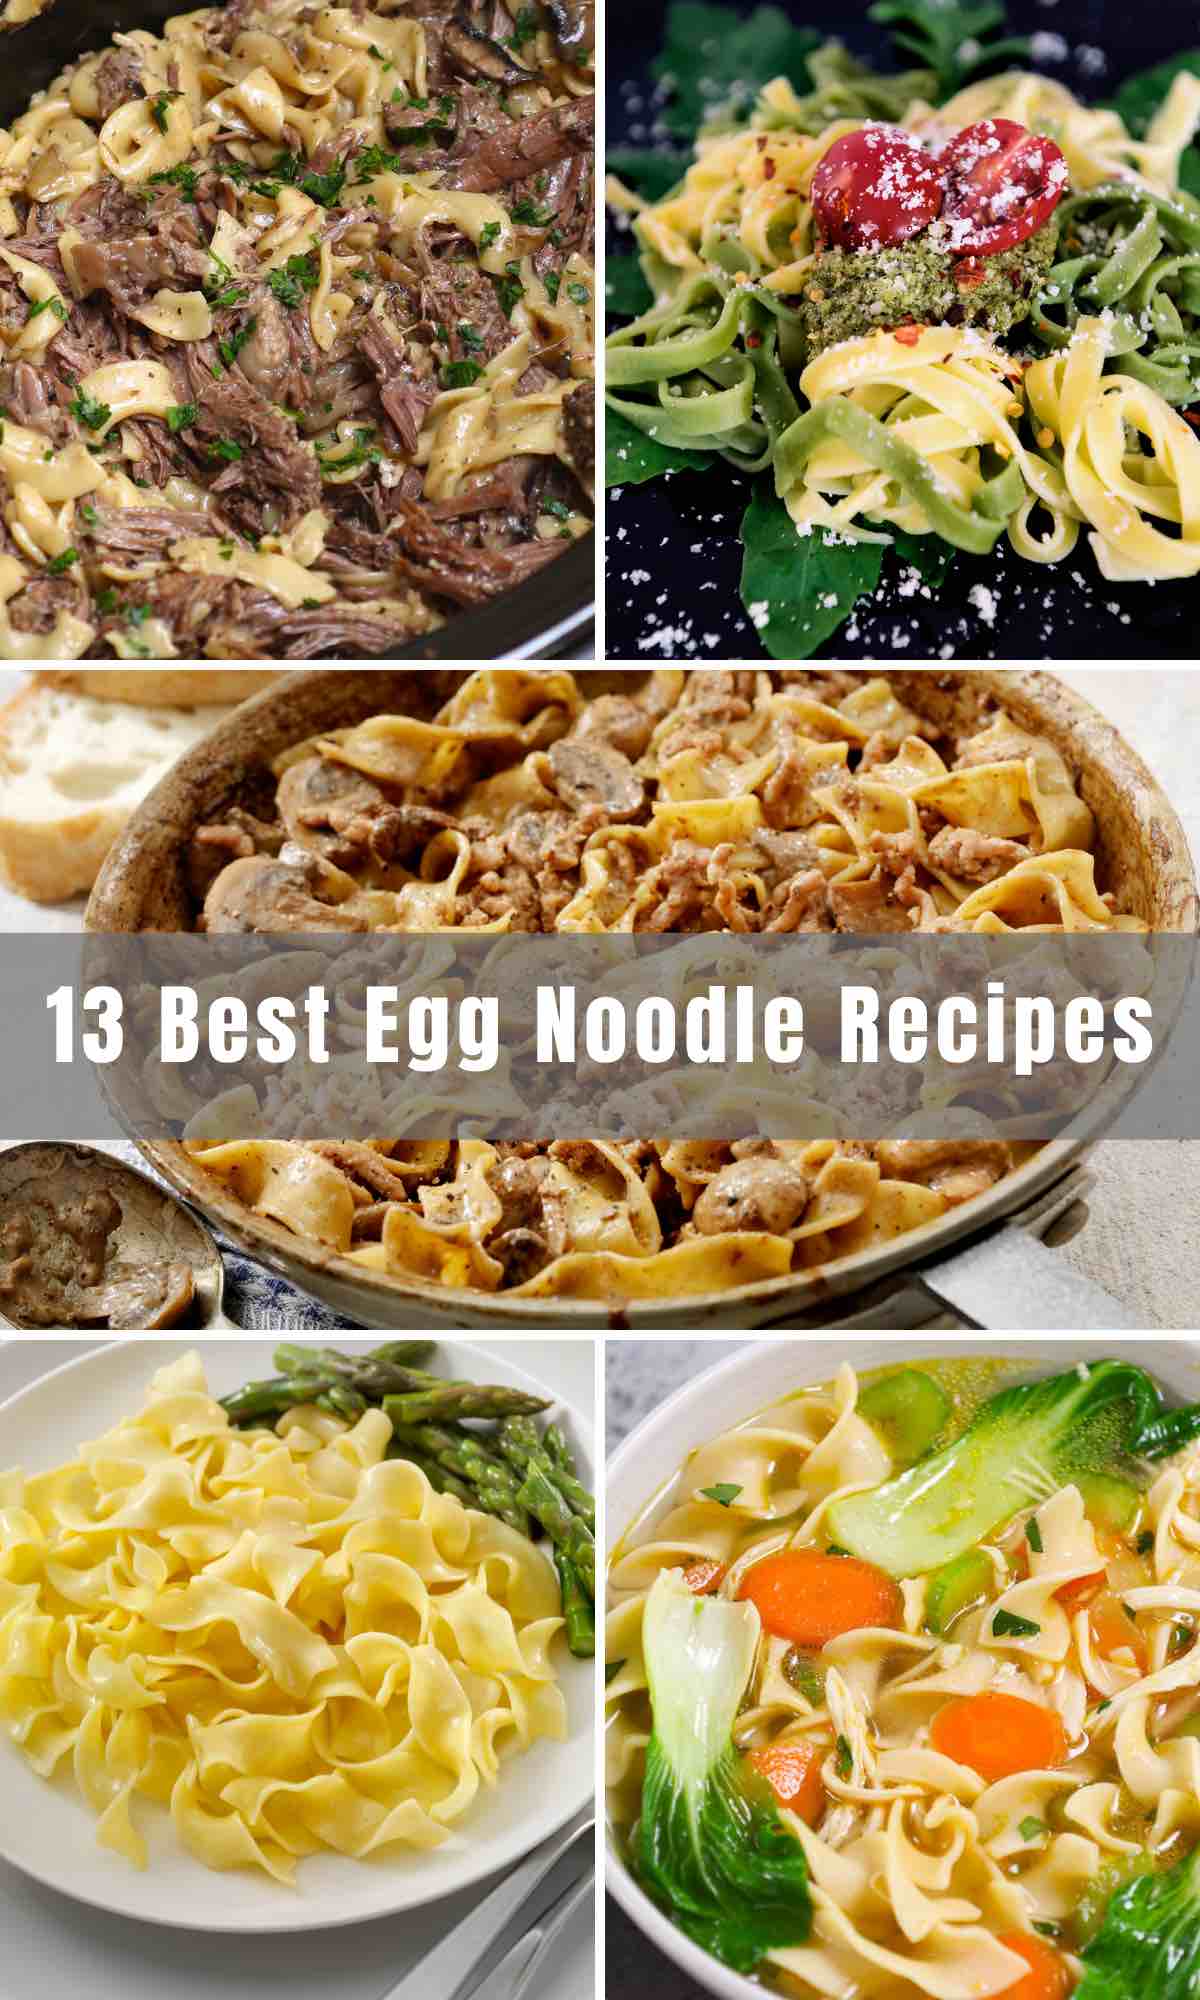 Egg Noodles are a delicious ingredient in many Asian cuisines. We've rounded up 13 of the Best Egg Noodle Recipes that are easy to make and loaded with flavors. From Lo Mein to chicken noodle soup and beef stroganoff, there's something you'd love to try for dinner tonight!